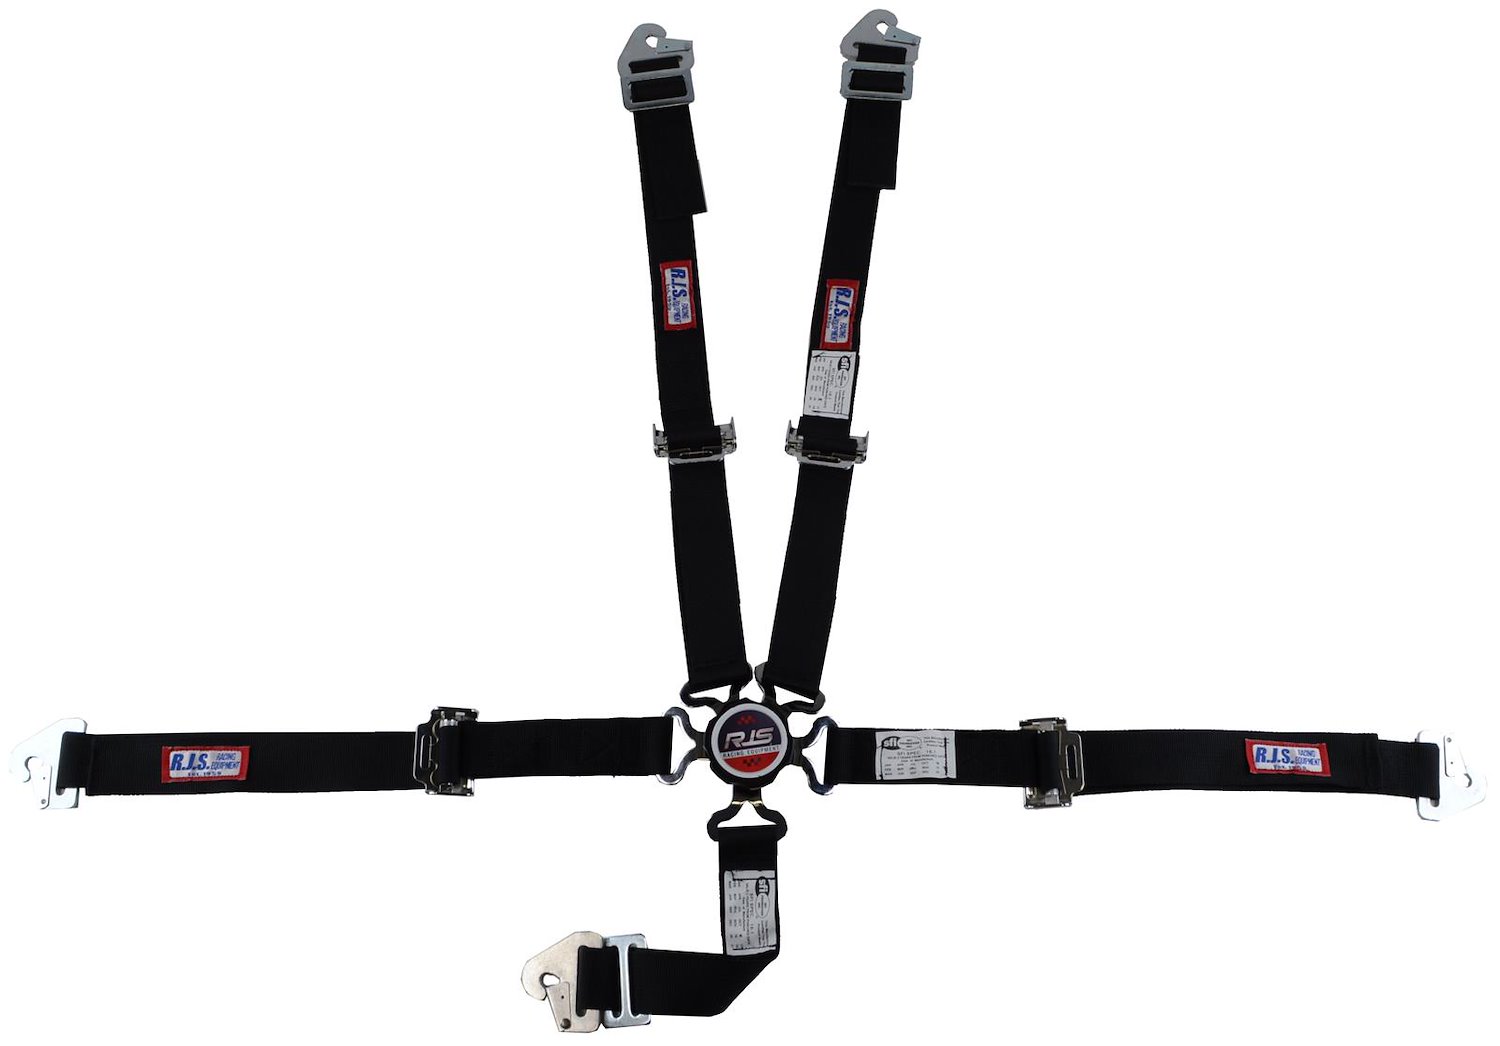 SFI 16.1 CAM-LOCK HARNESS 2 PULL DOWN Lap Belt 2 Shoulder Harness Individual FLOOR Mount 2 DOUBLESub ALL WRAP/BOLT ENDS GRAY